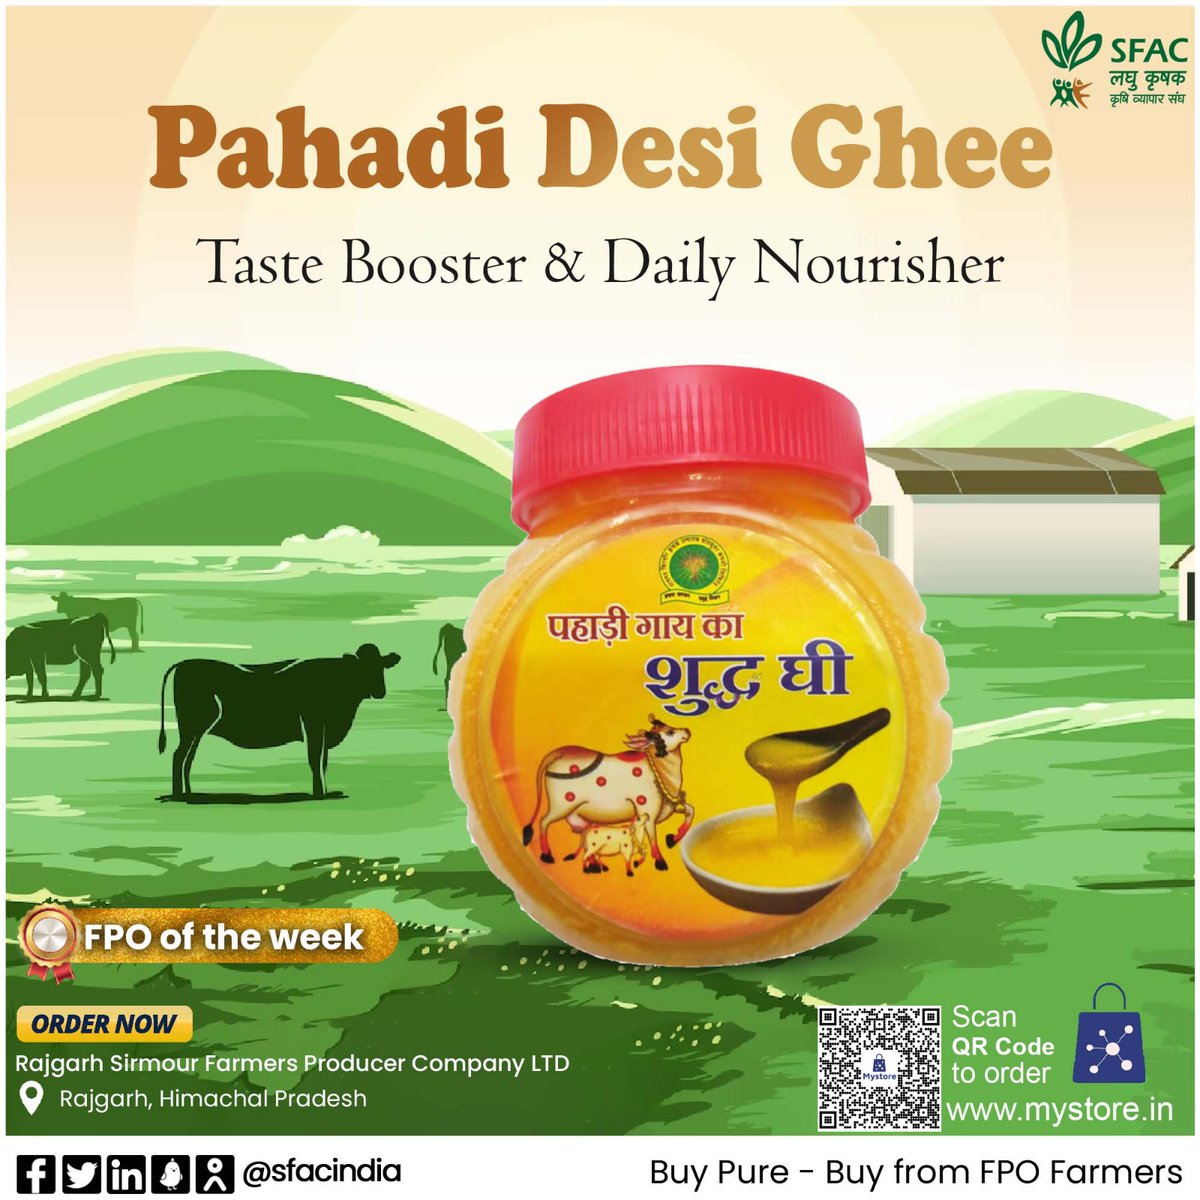 No adulteration, pure ghee, made from premium A2 cow milk. A daily nourisher with eternal goodness. Buy straight from FPO farmers at👇 mystore.in/en/product/pha… 🍲 #VocalForLocal #healthychoices #healthyeating #healthyhabits #tastyrecipes